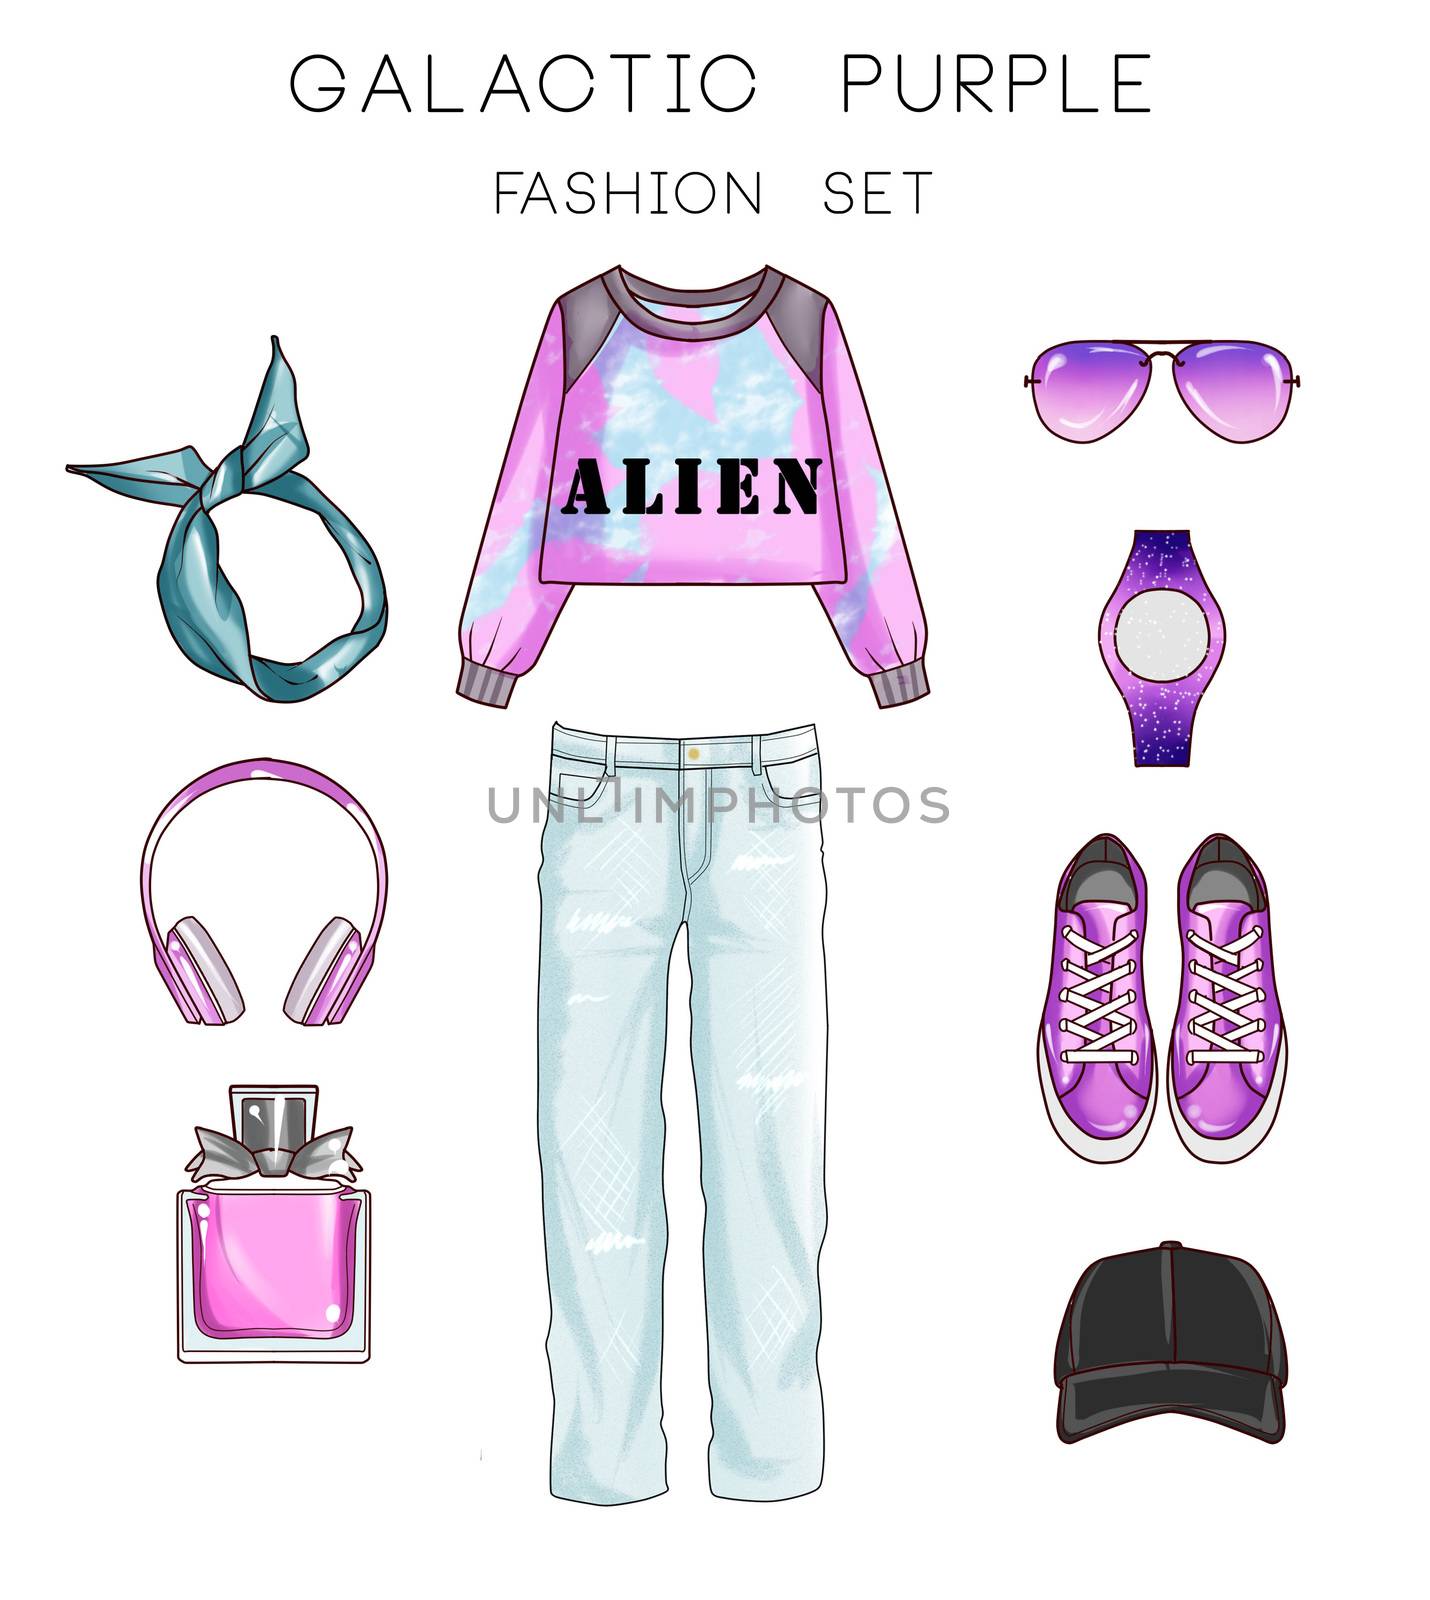 Fashion set of woman's clothes and accessories - baggy jeans, sneakers, perfume bottle, sweater, ear cuffs, hat, watch by GGillustrations